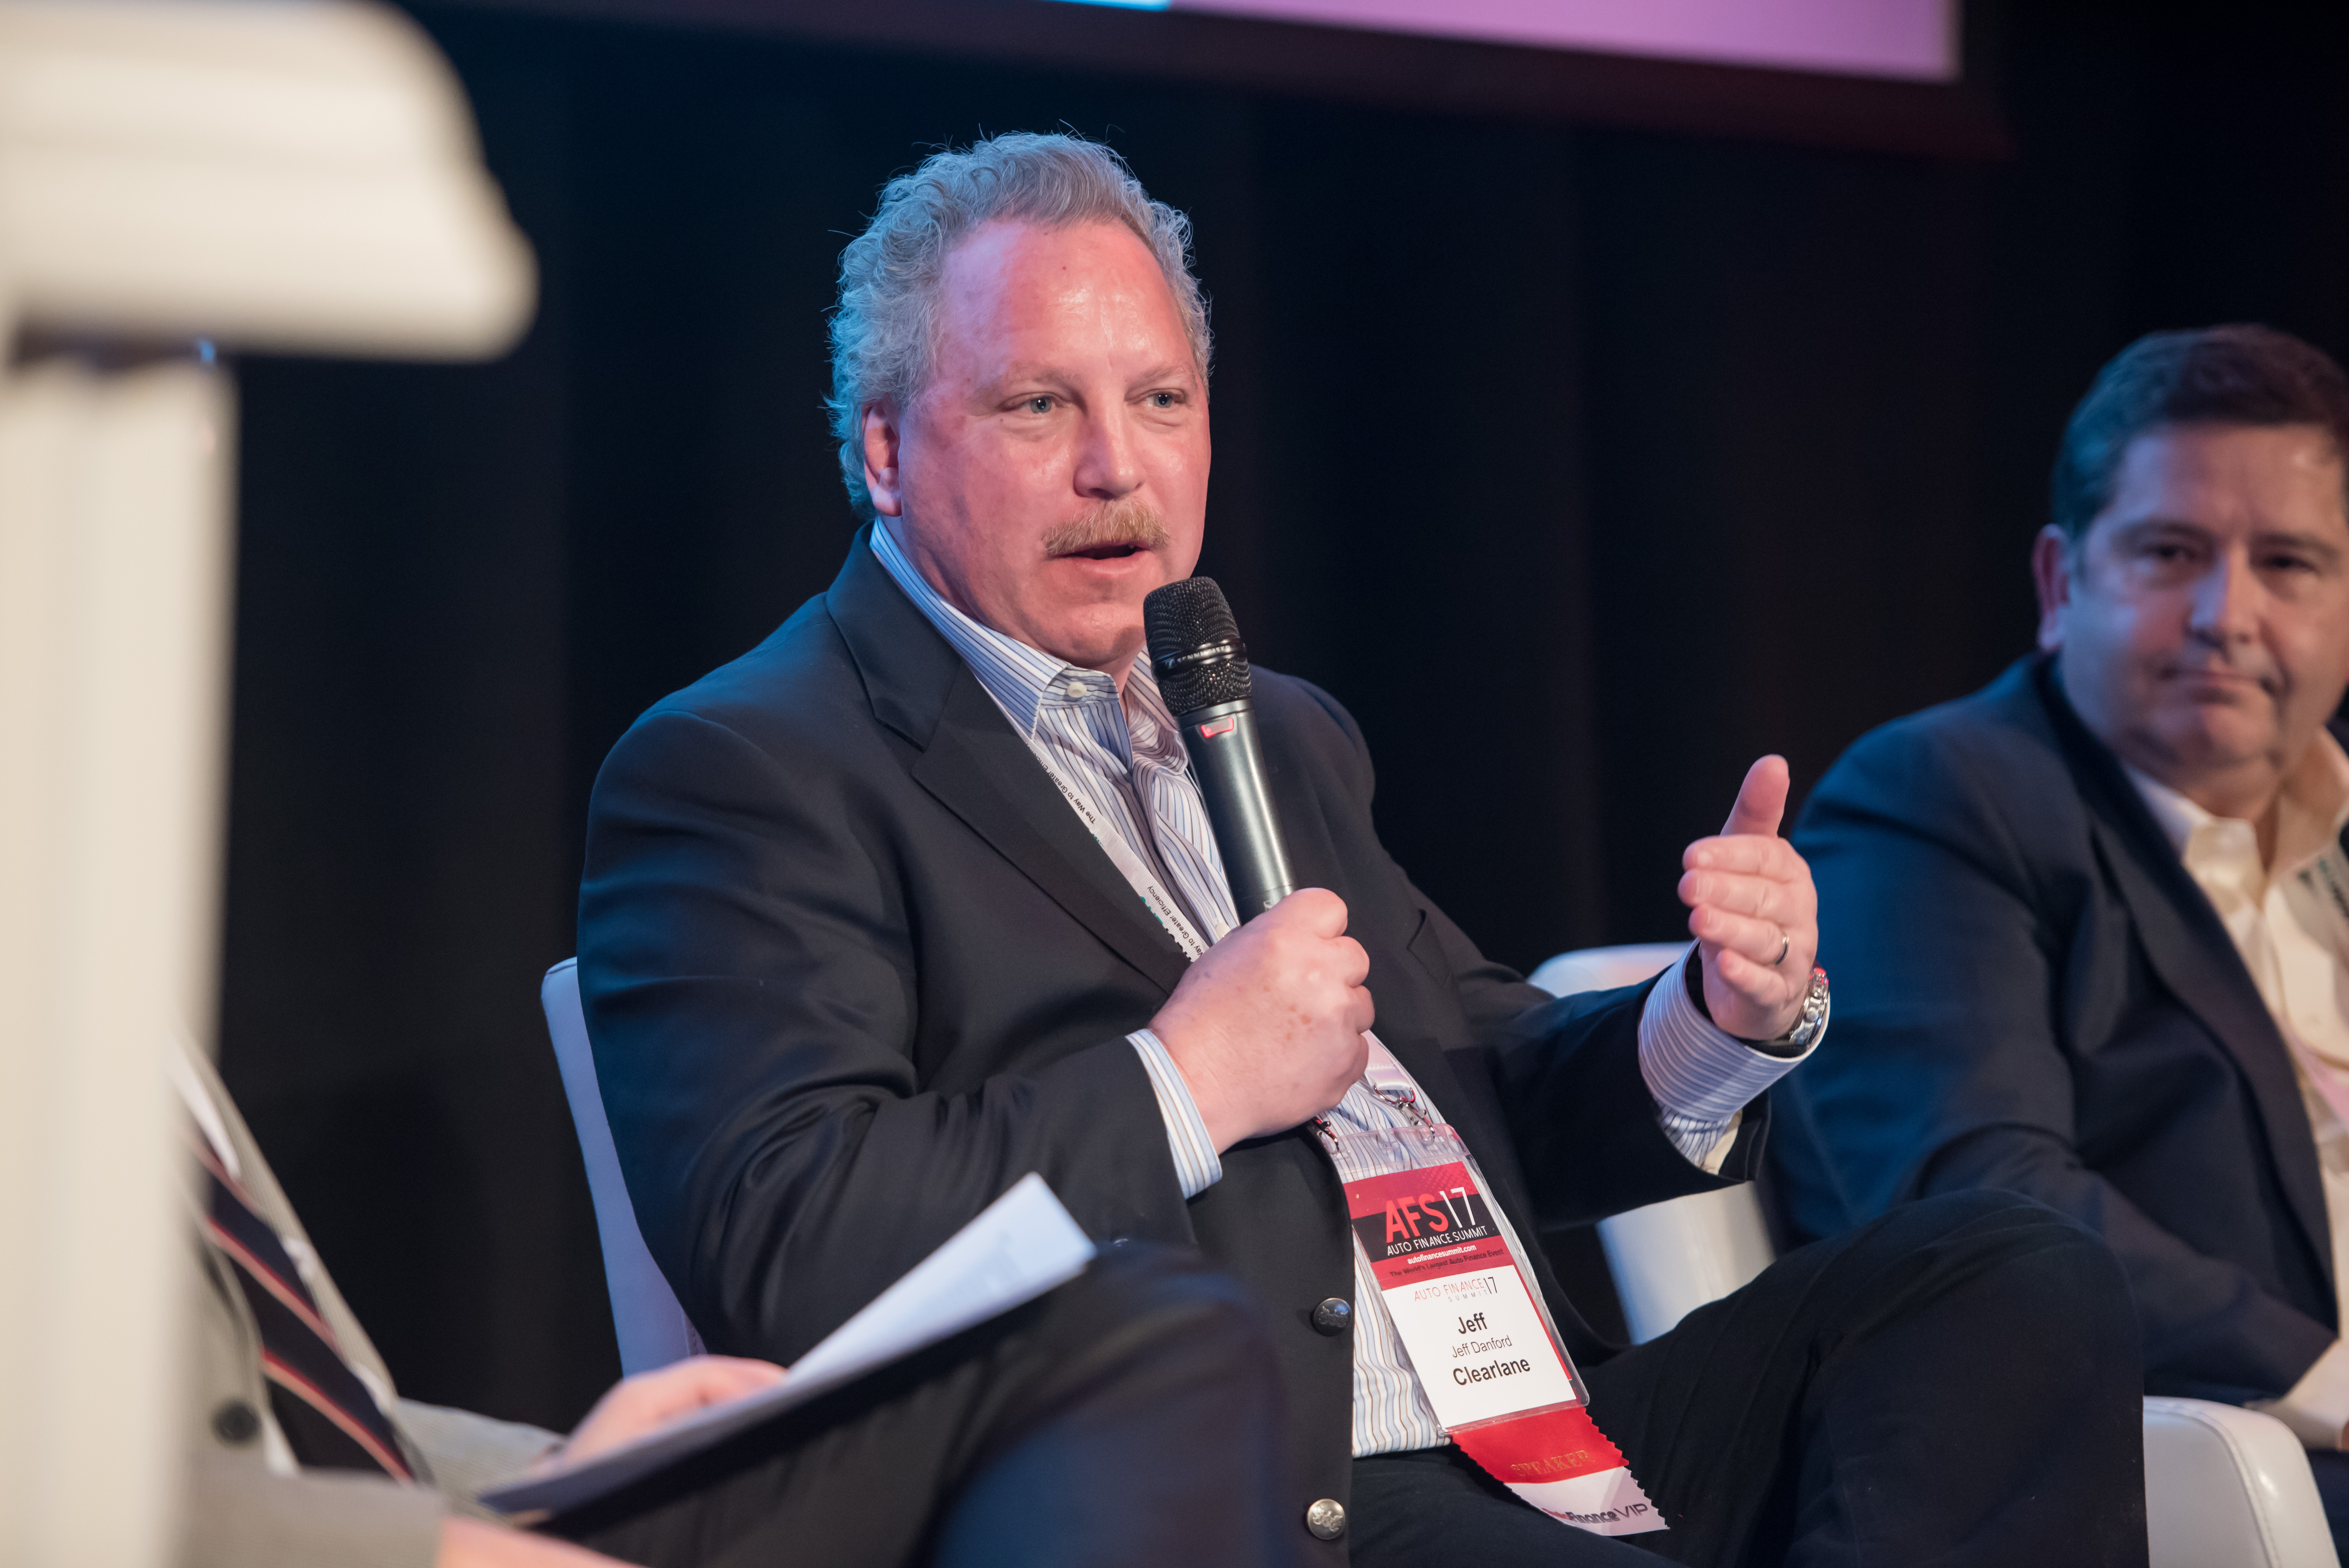 Jeff Danford, senior vice president of auto finance at Ally Financial Inc., talks about direct lending during a panel at the 2017 Auto Finance Summit.